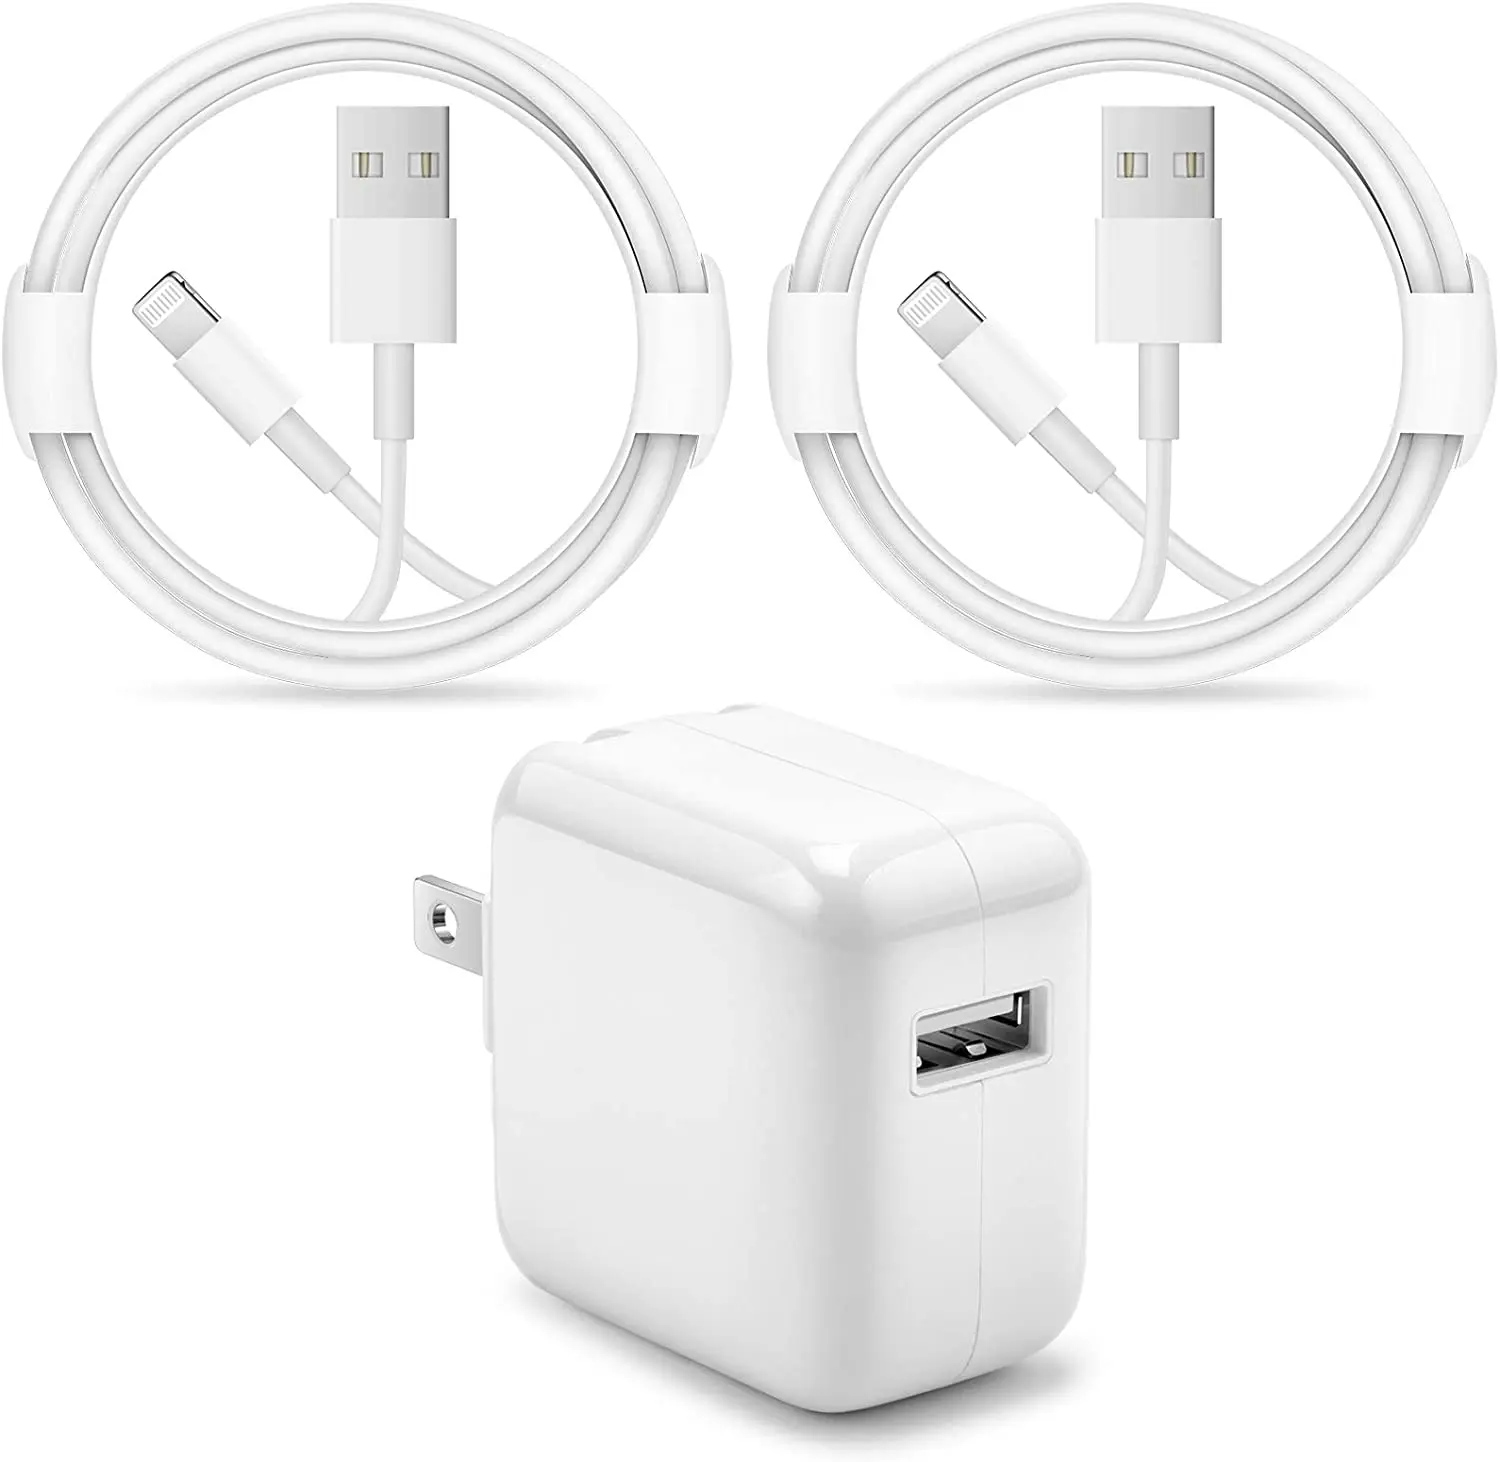 iPad Charger iPhone Fast Charger [Apple MFi Certified] 12W USB Wall Charger Foldable Portable Travel Plug with 2 Pack Lightning